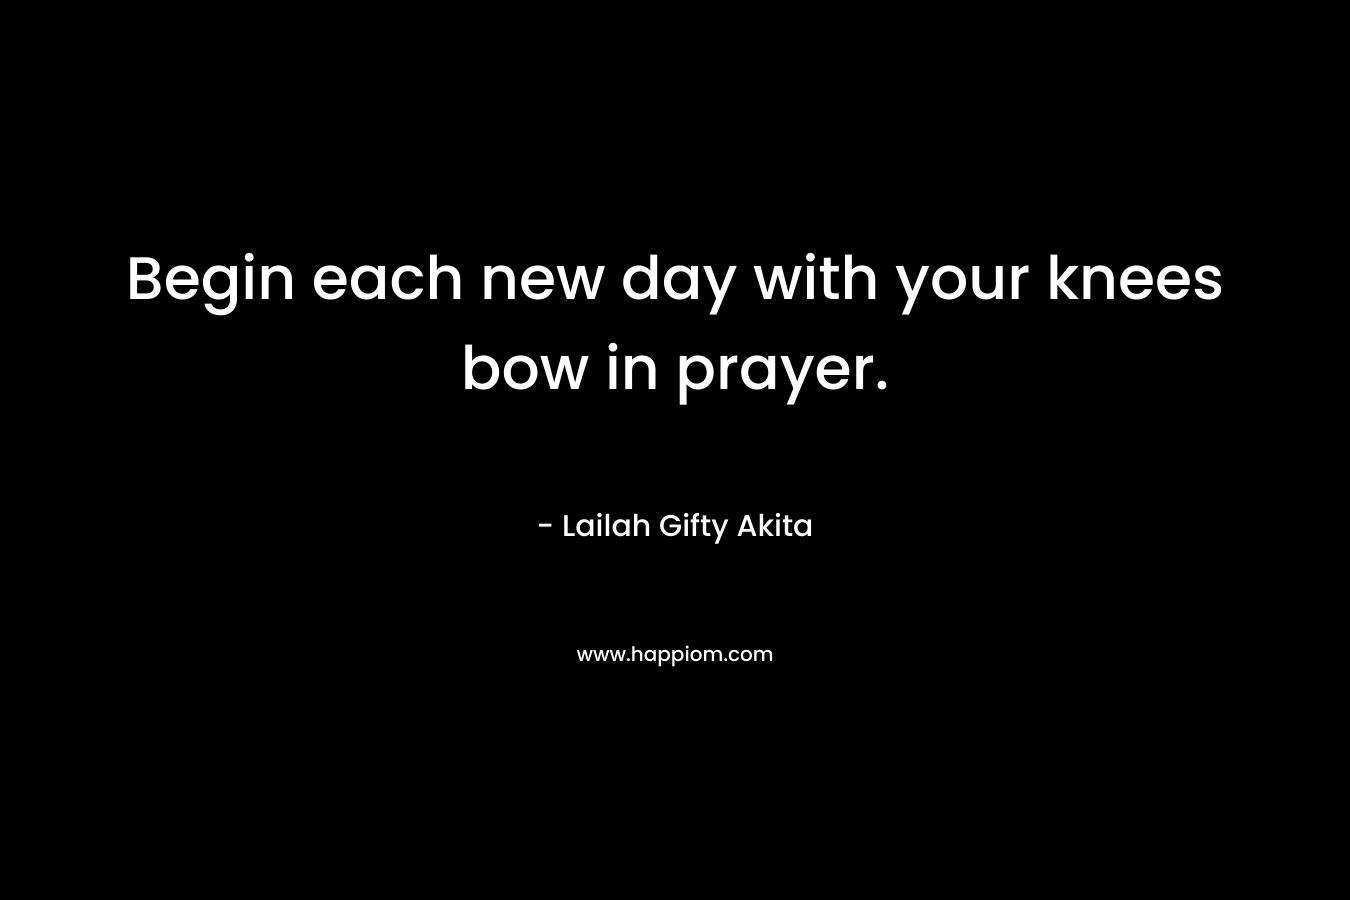 Begin each new day with your knees bow in prayer.